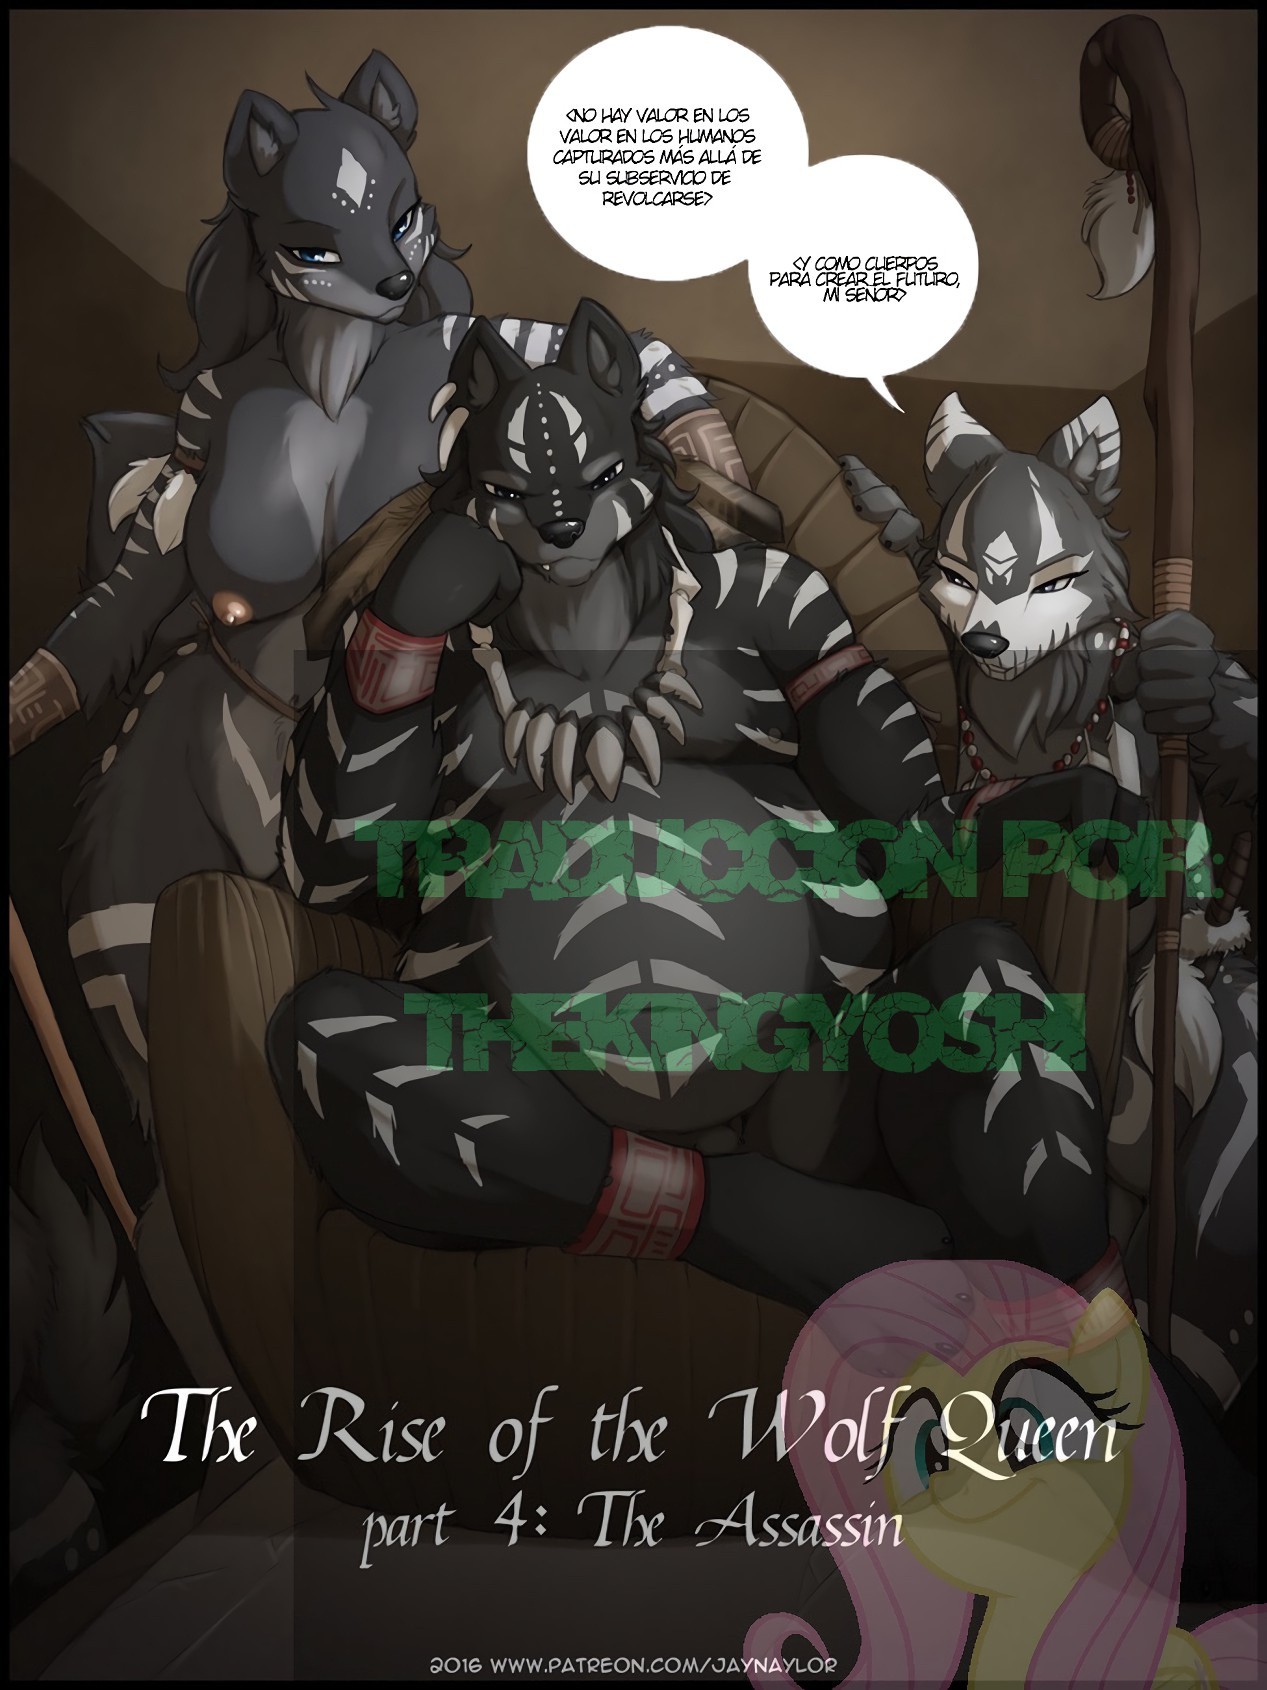 The Rise of The Wolf Queen Part 4: The Assassin